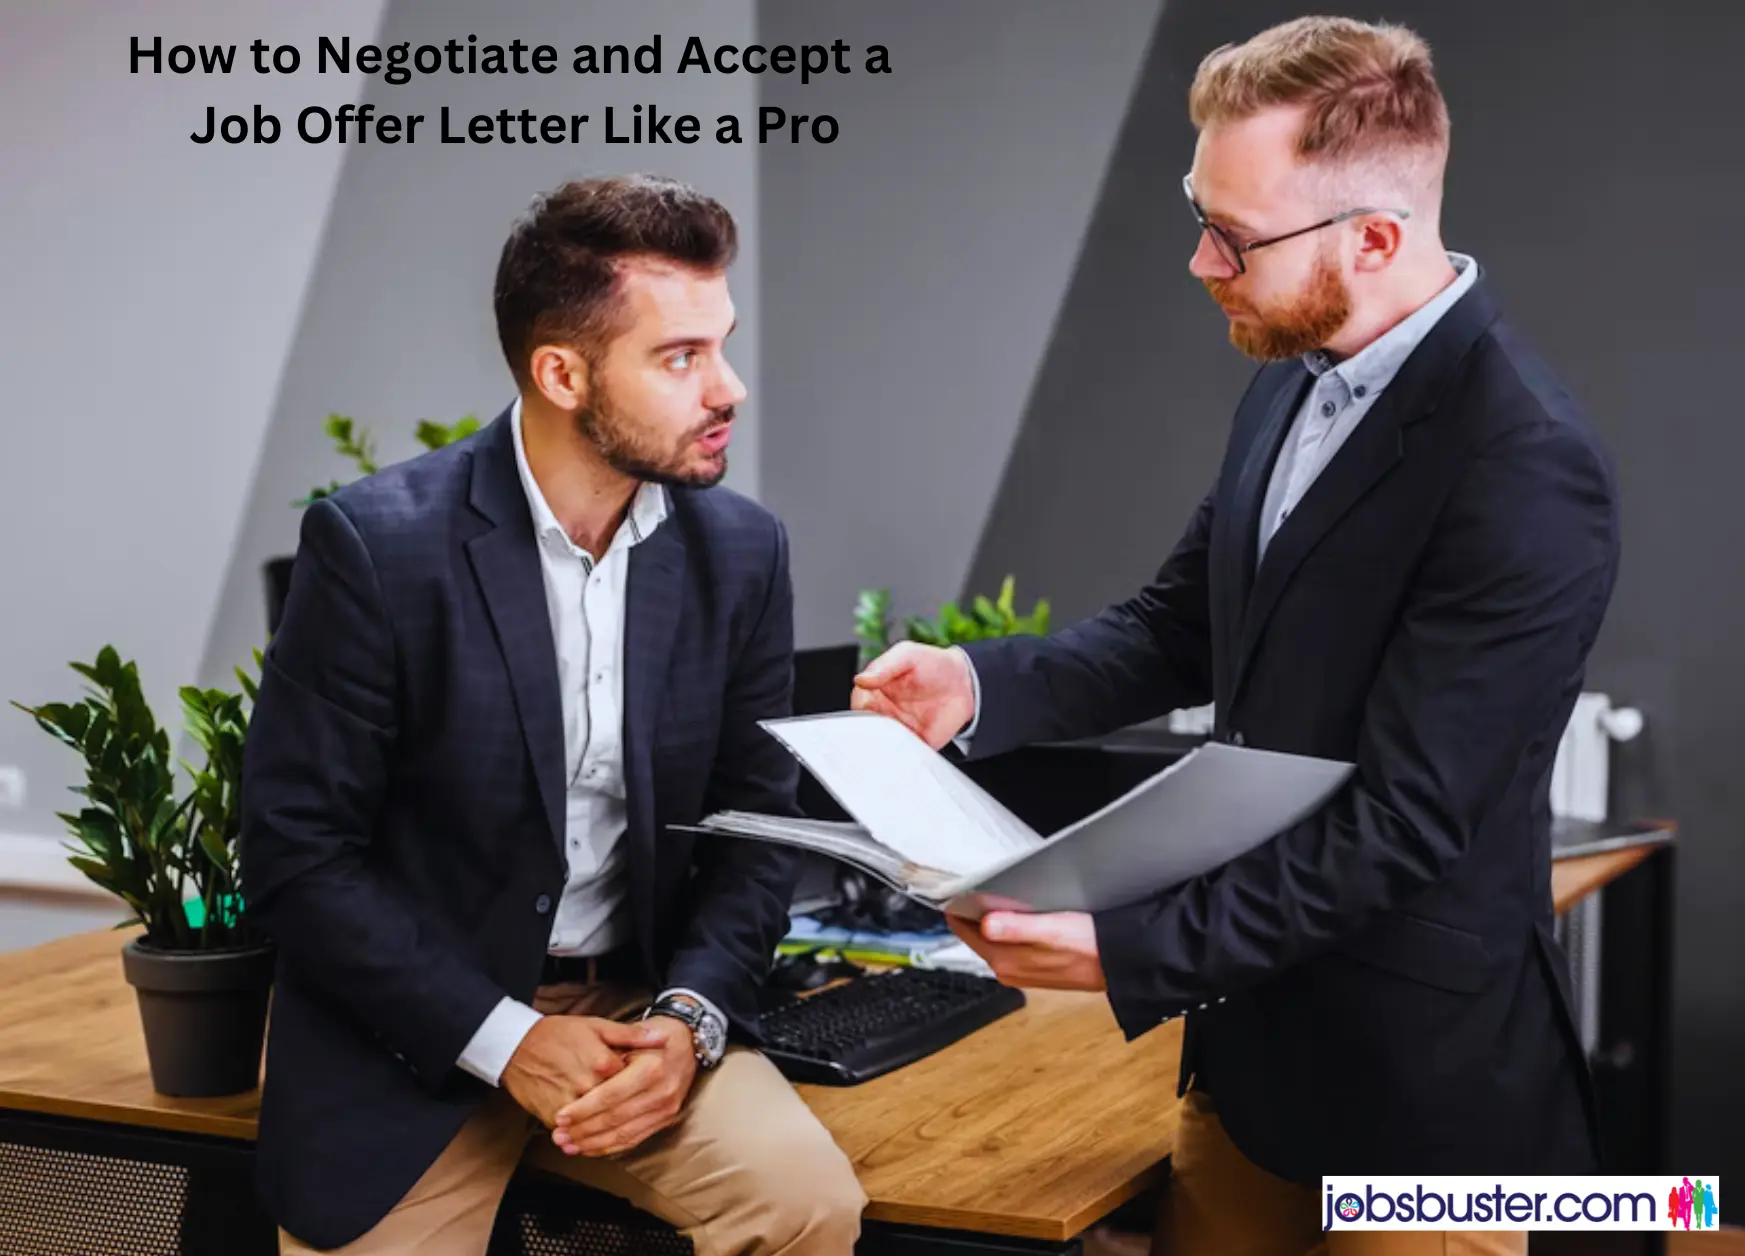 How to Negotiate and Accept a Job Offer Letter Like a Pro